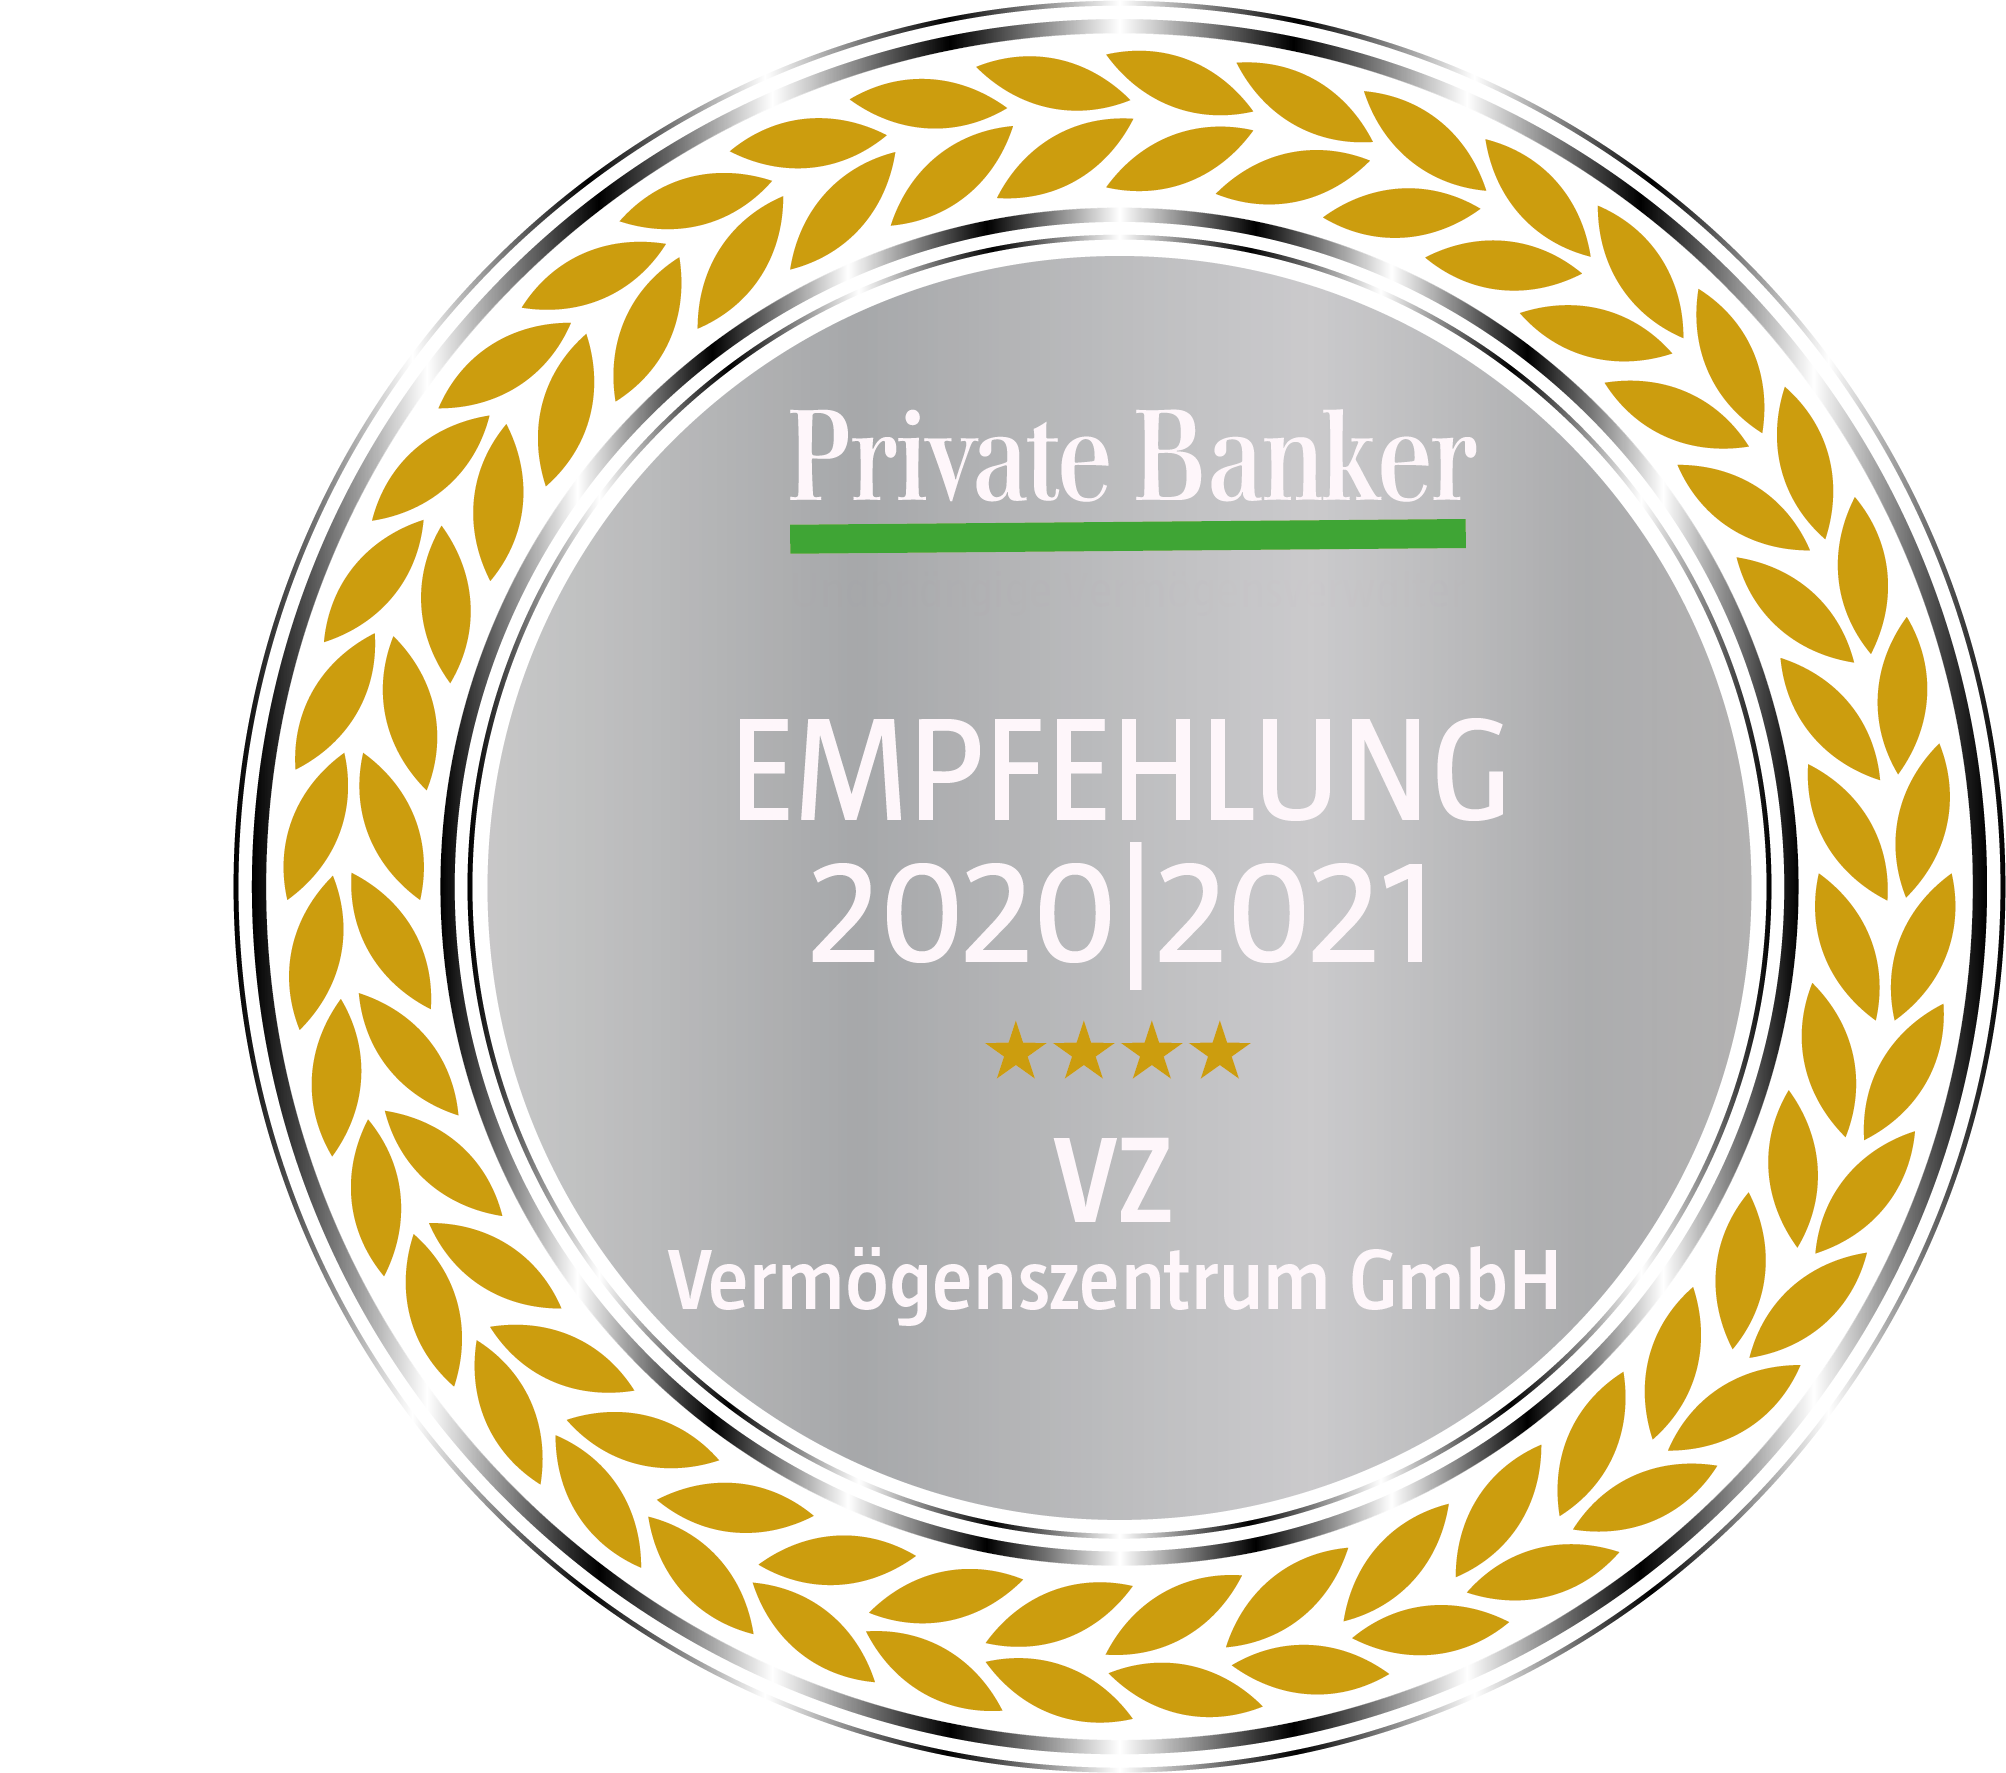 Private Banker Empfehlung 2021